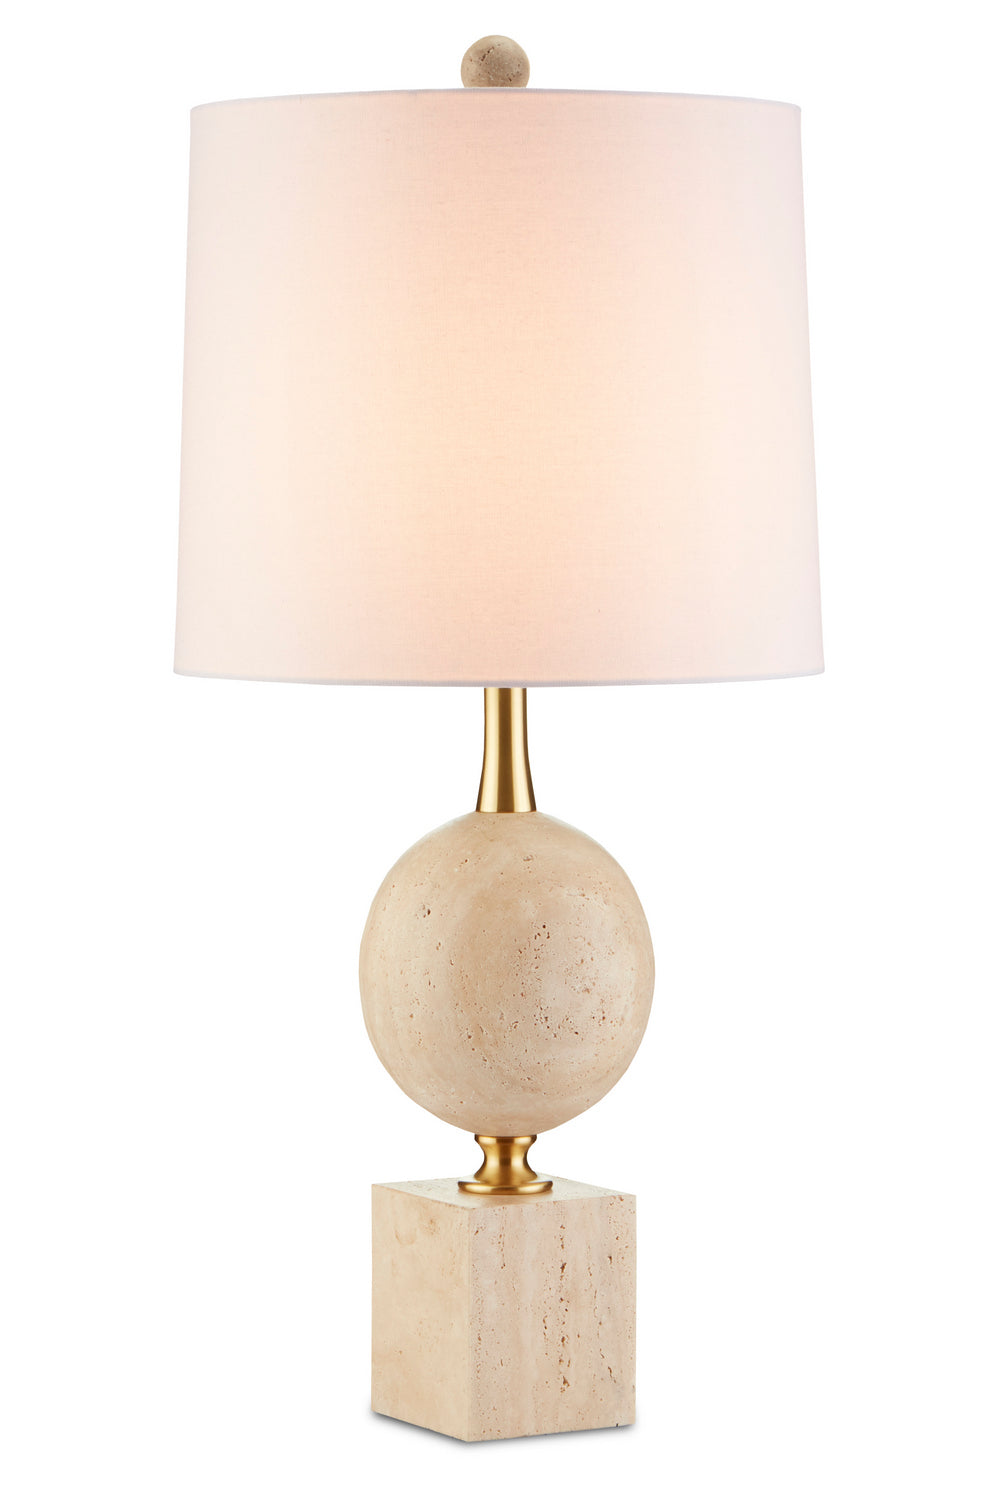 One Light Table Lamp from the Adorno collection in Natural/Beige/Antique Brass finish